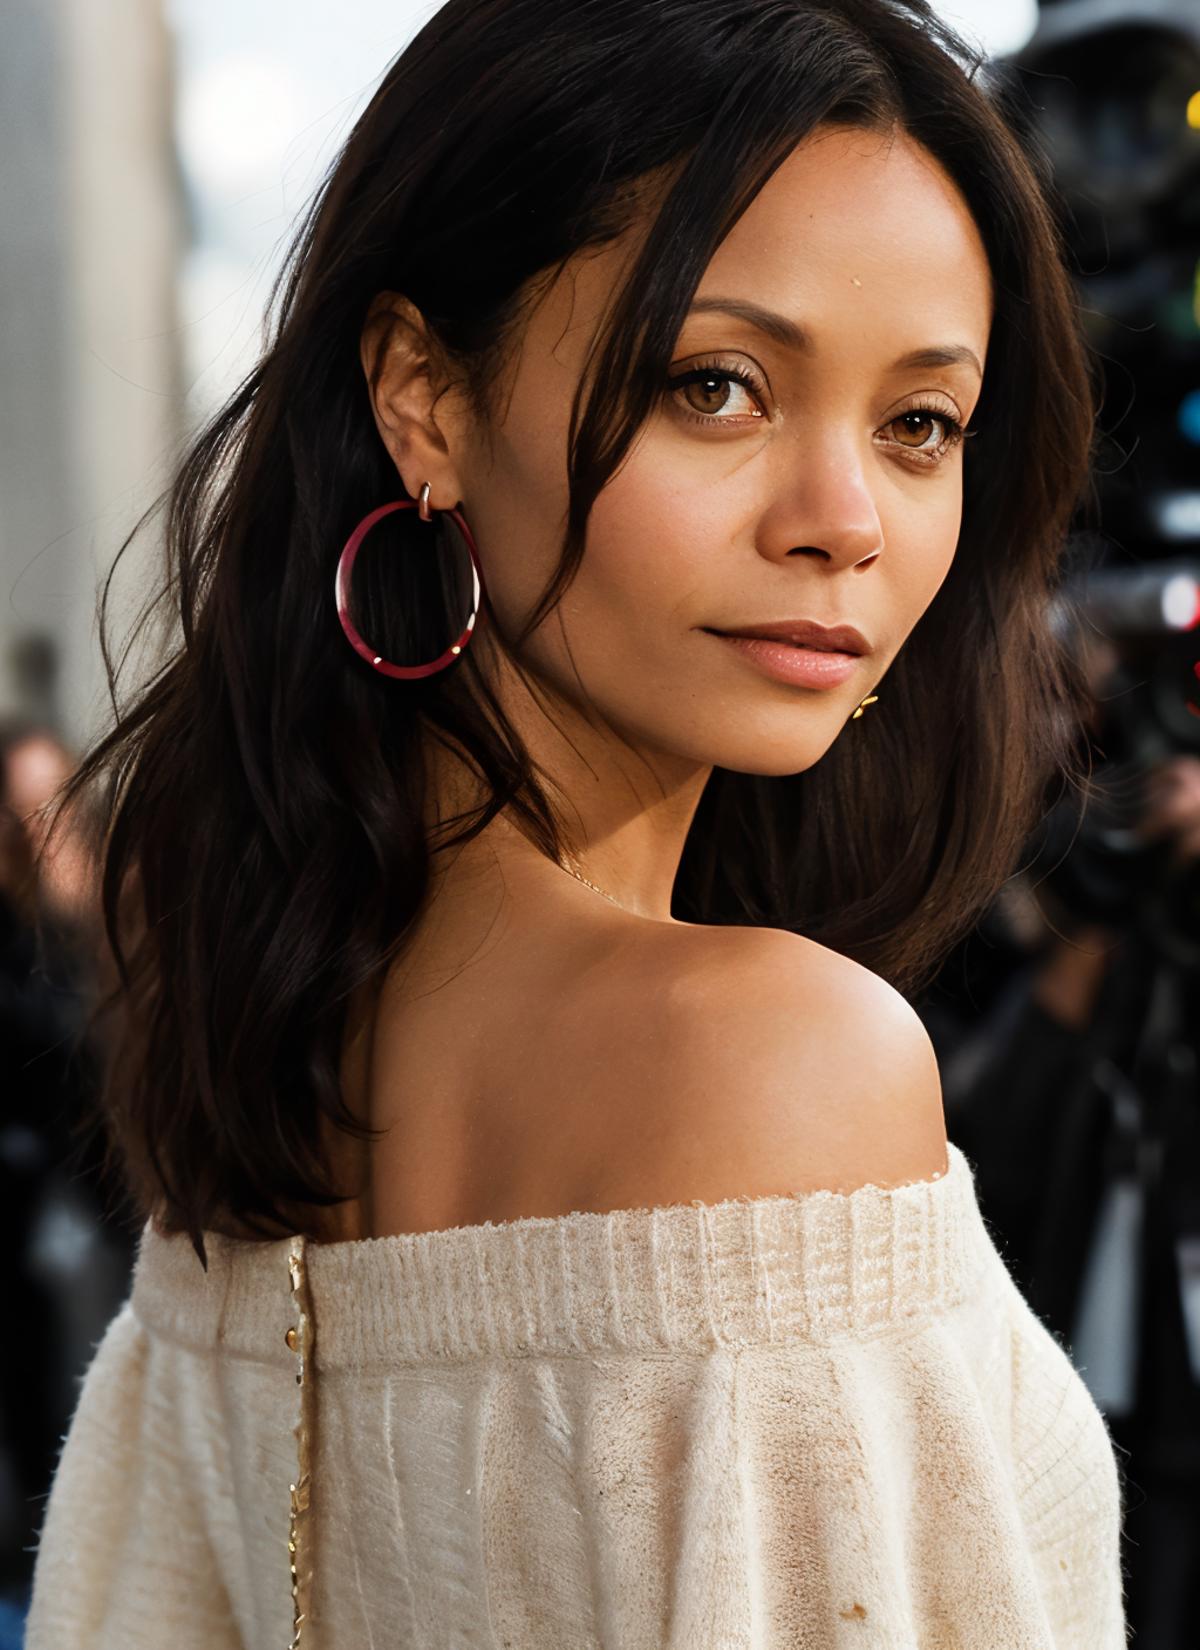 Thandie Newton (from Mission: Impossible 2) image by astragartist